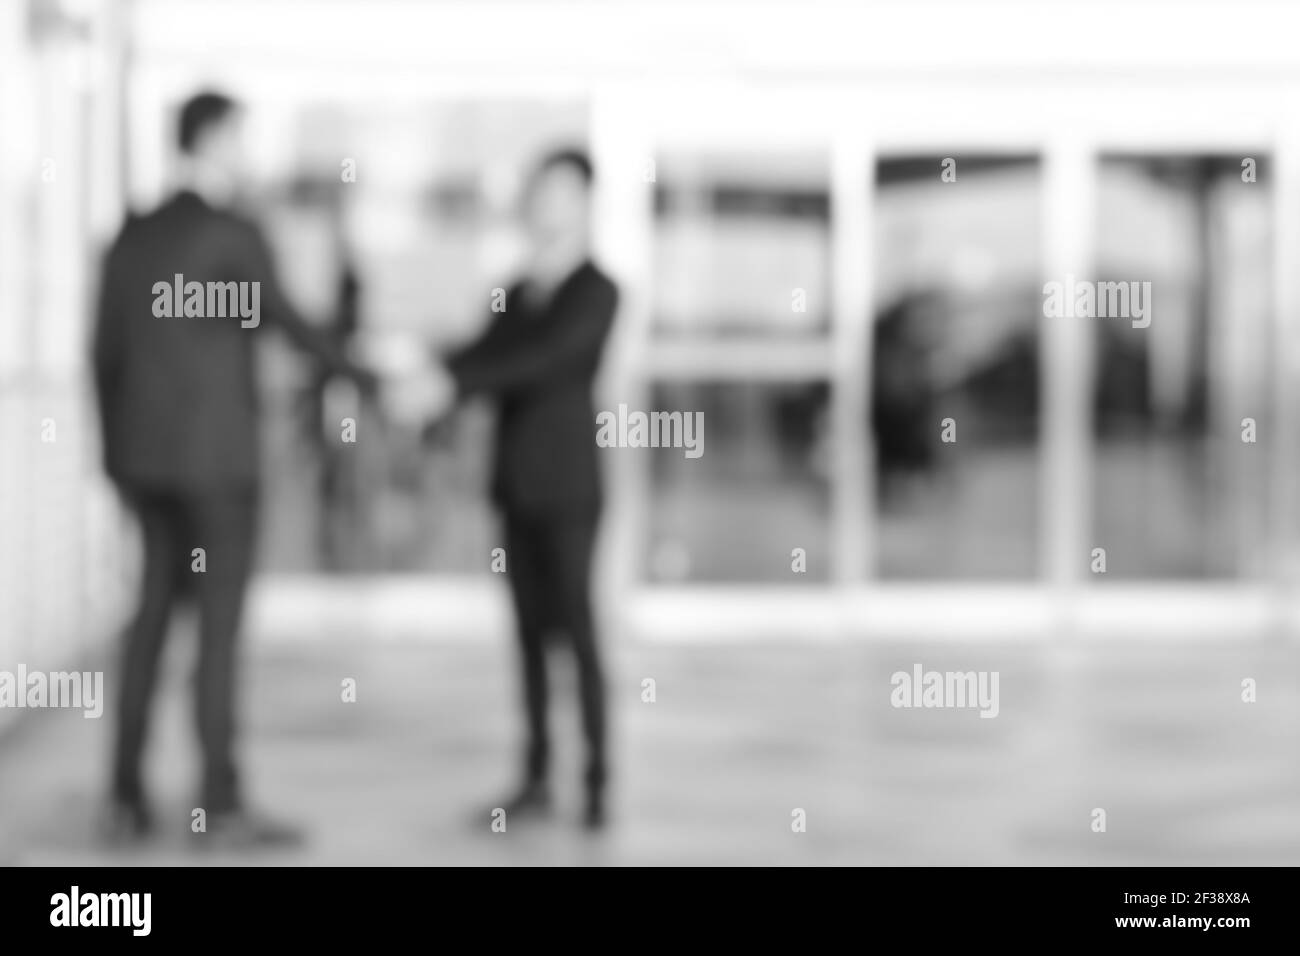 Blurred image of businessmen making handshake in front of office building doors, monochrome effect Stock Photo